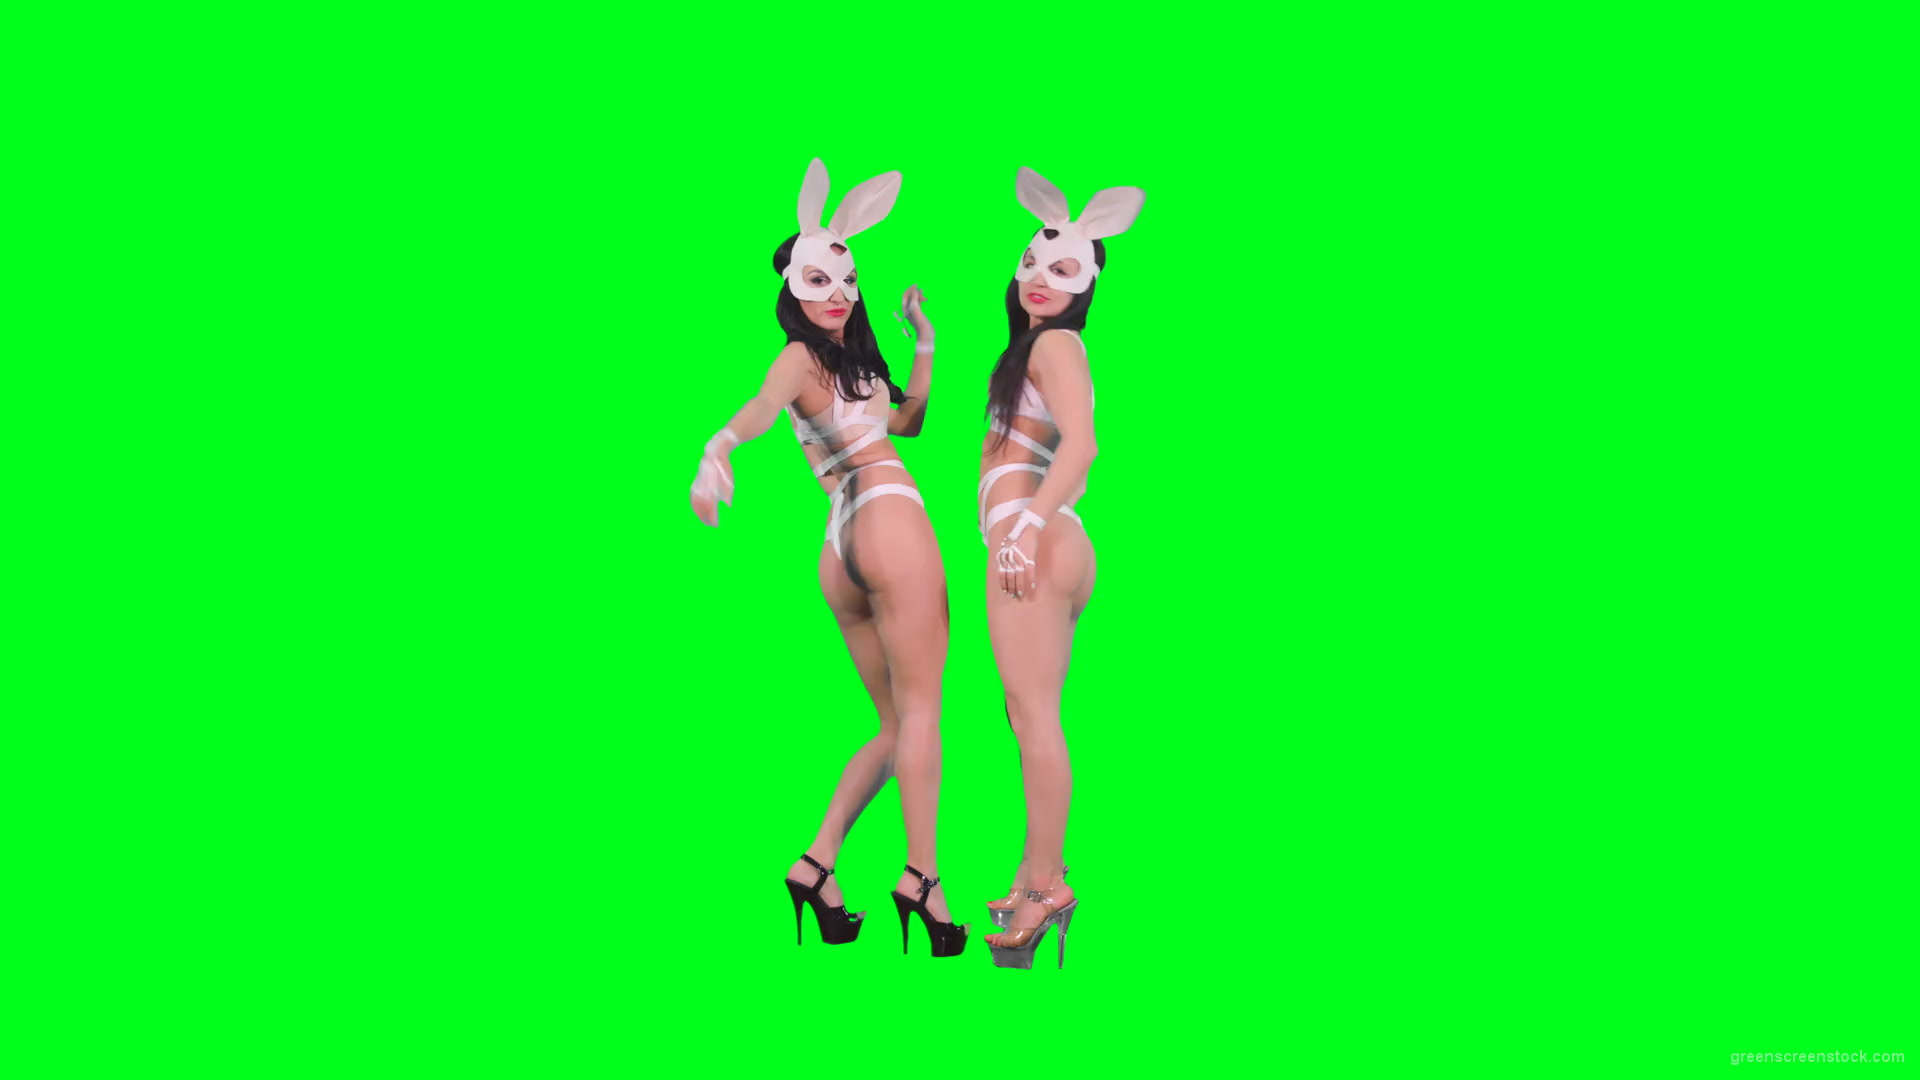 Light-erotic-girls-in-rabbit-playboy-costumes-on-green-screen-moving-sexy-4K-Video-Footage-1920_001 Green Screen Stock